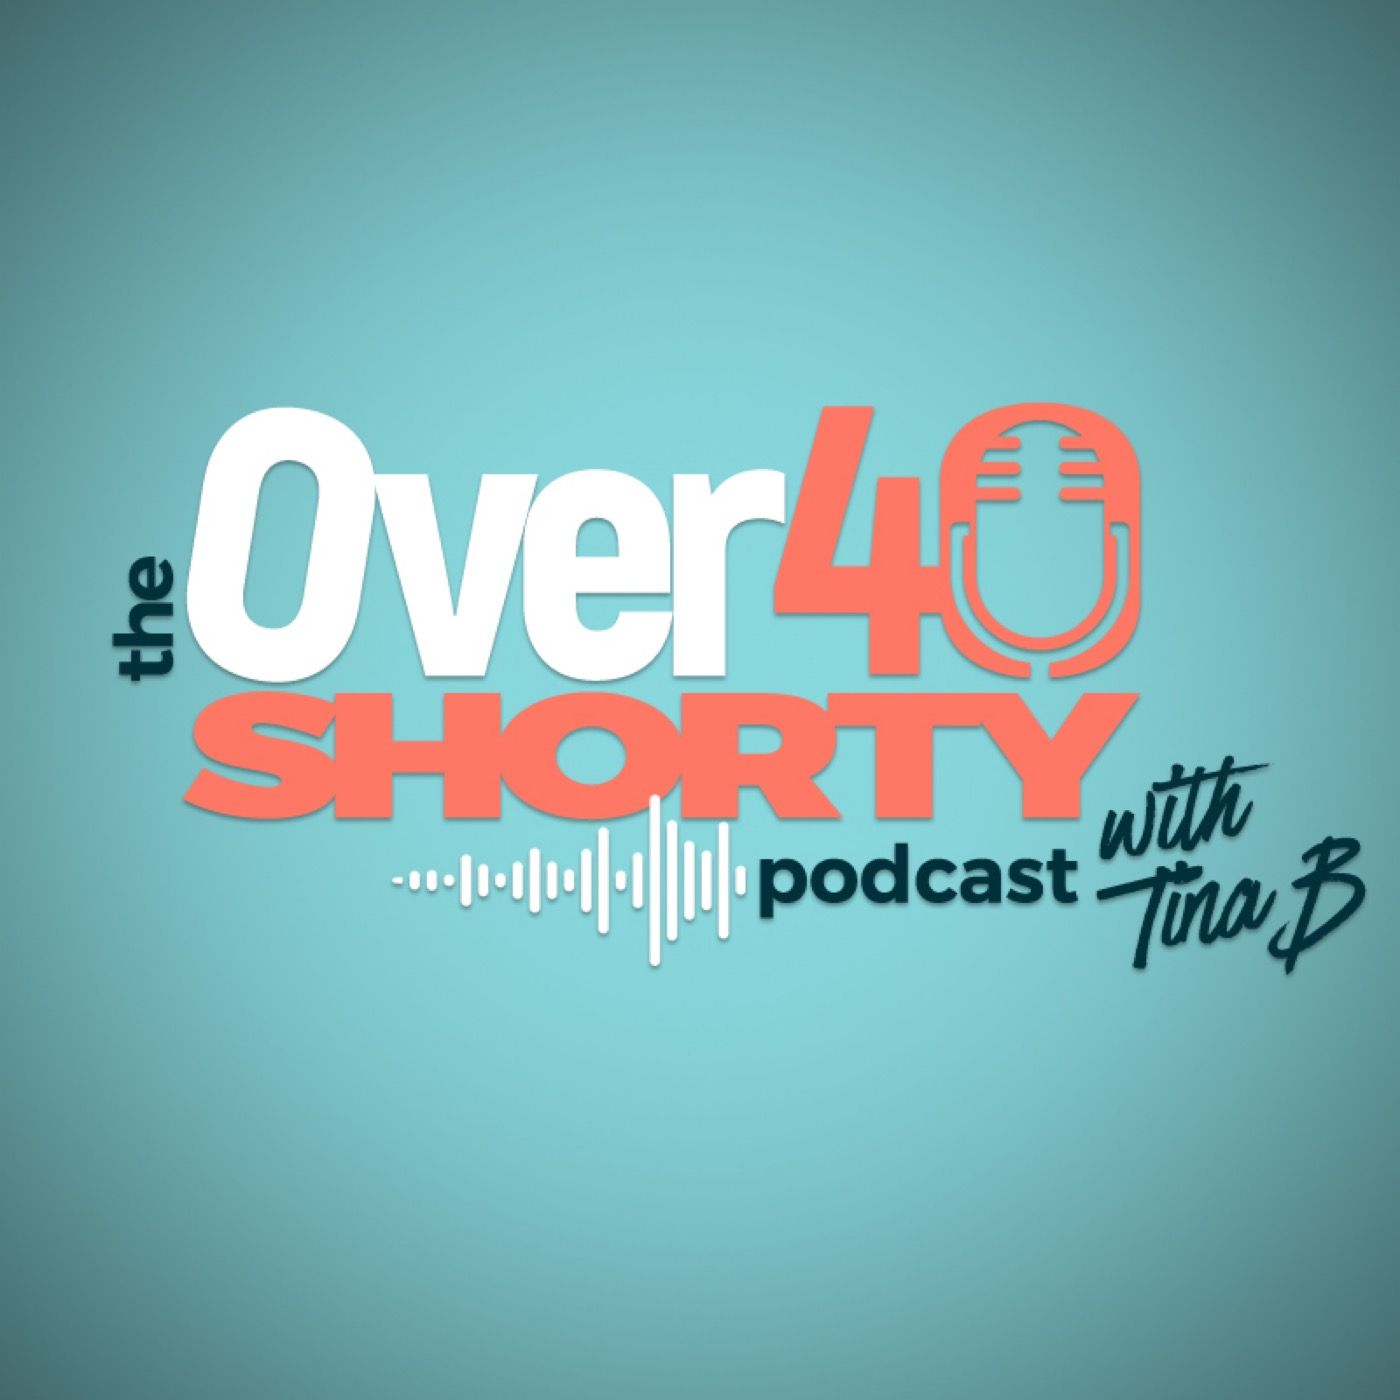 The Over 40 Shorty Podcast